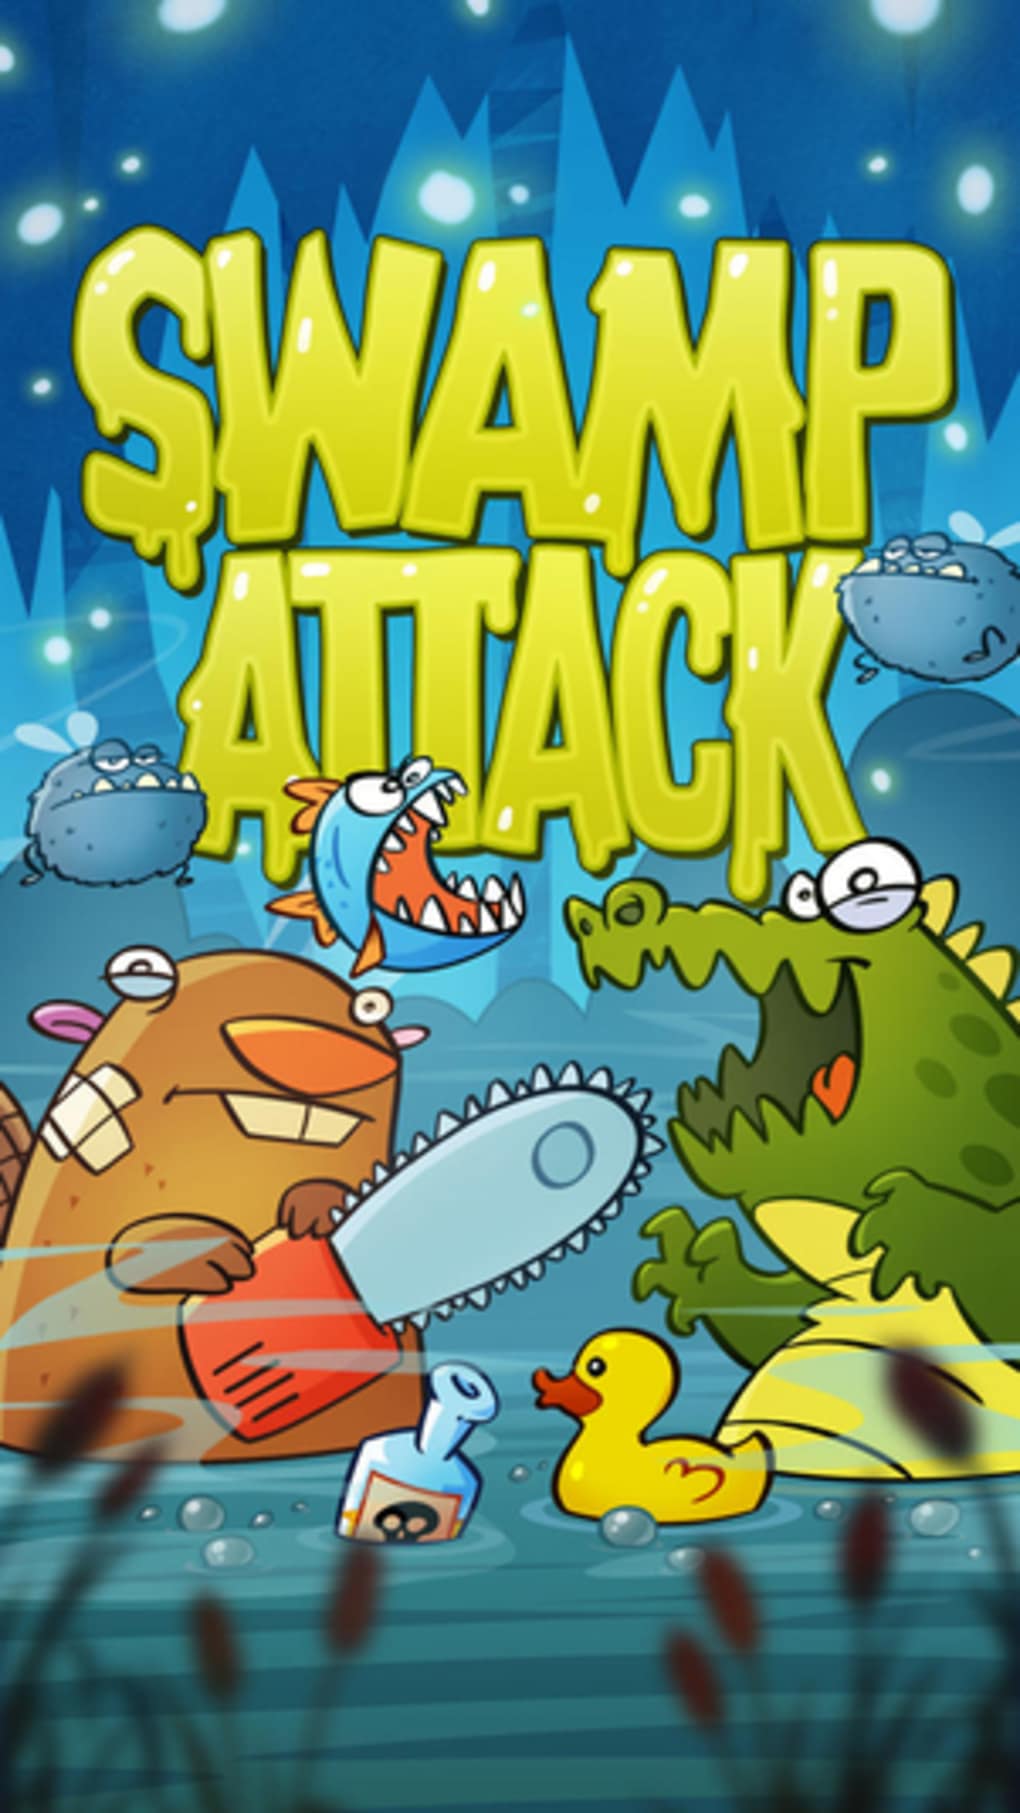 swamp attack play now